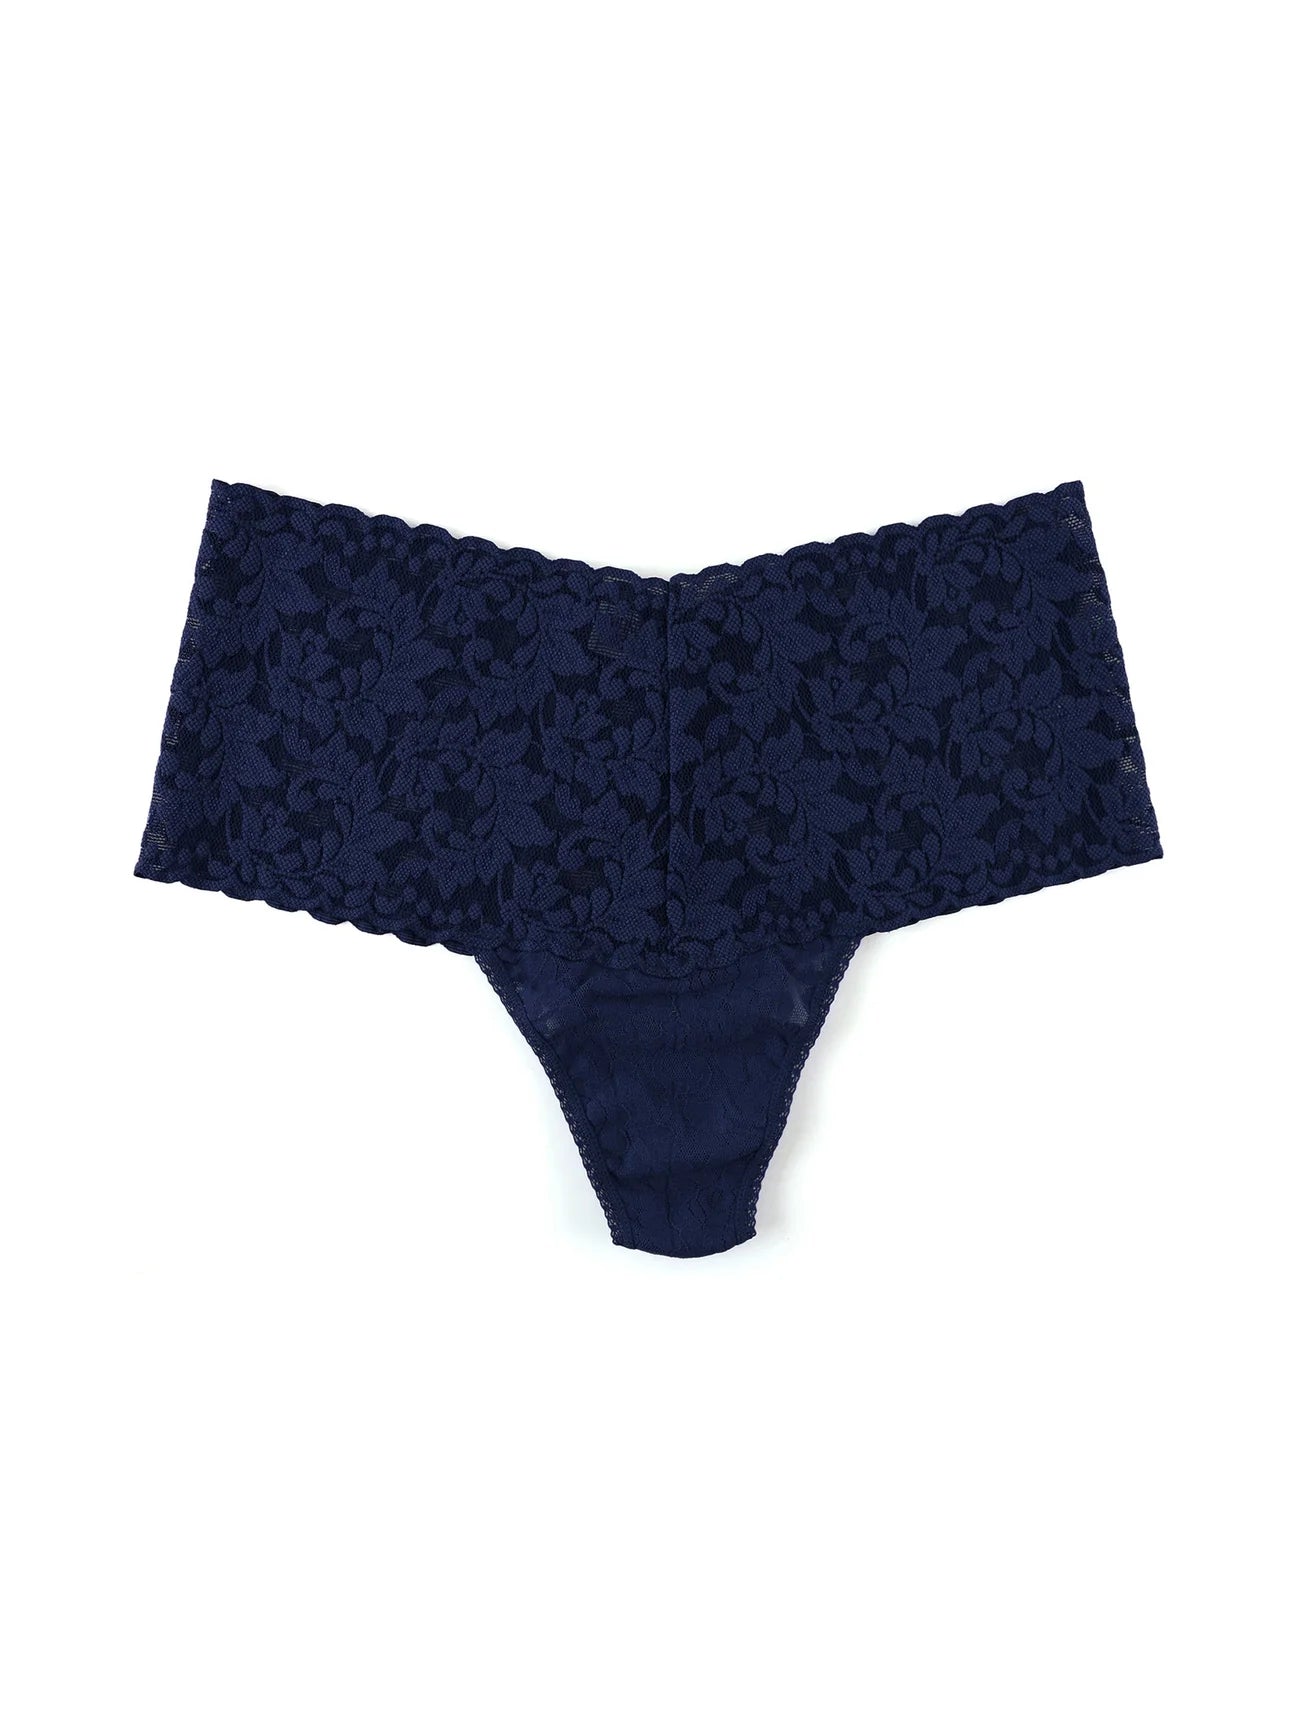 Hanky Panky Retro Thong in Navy in front view product image